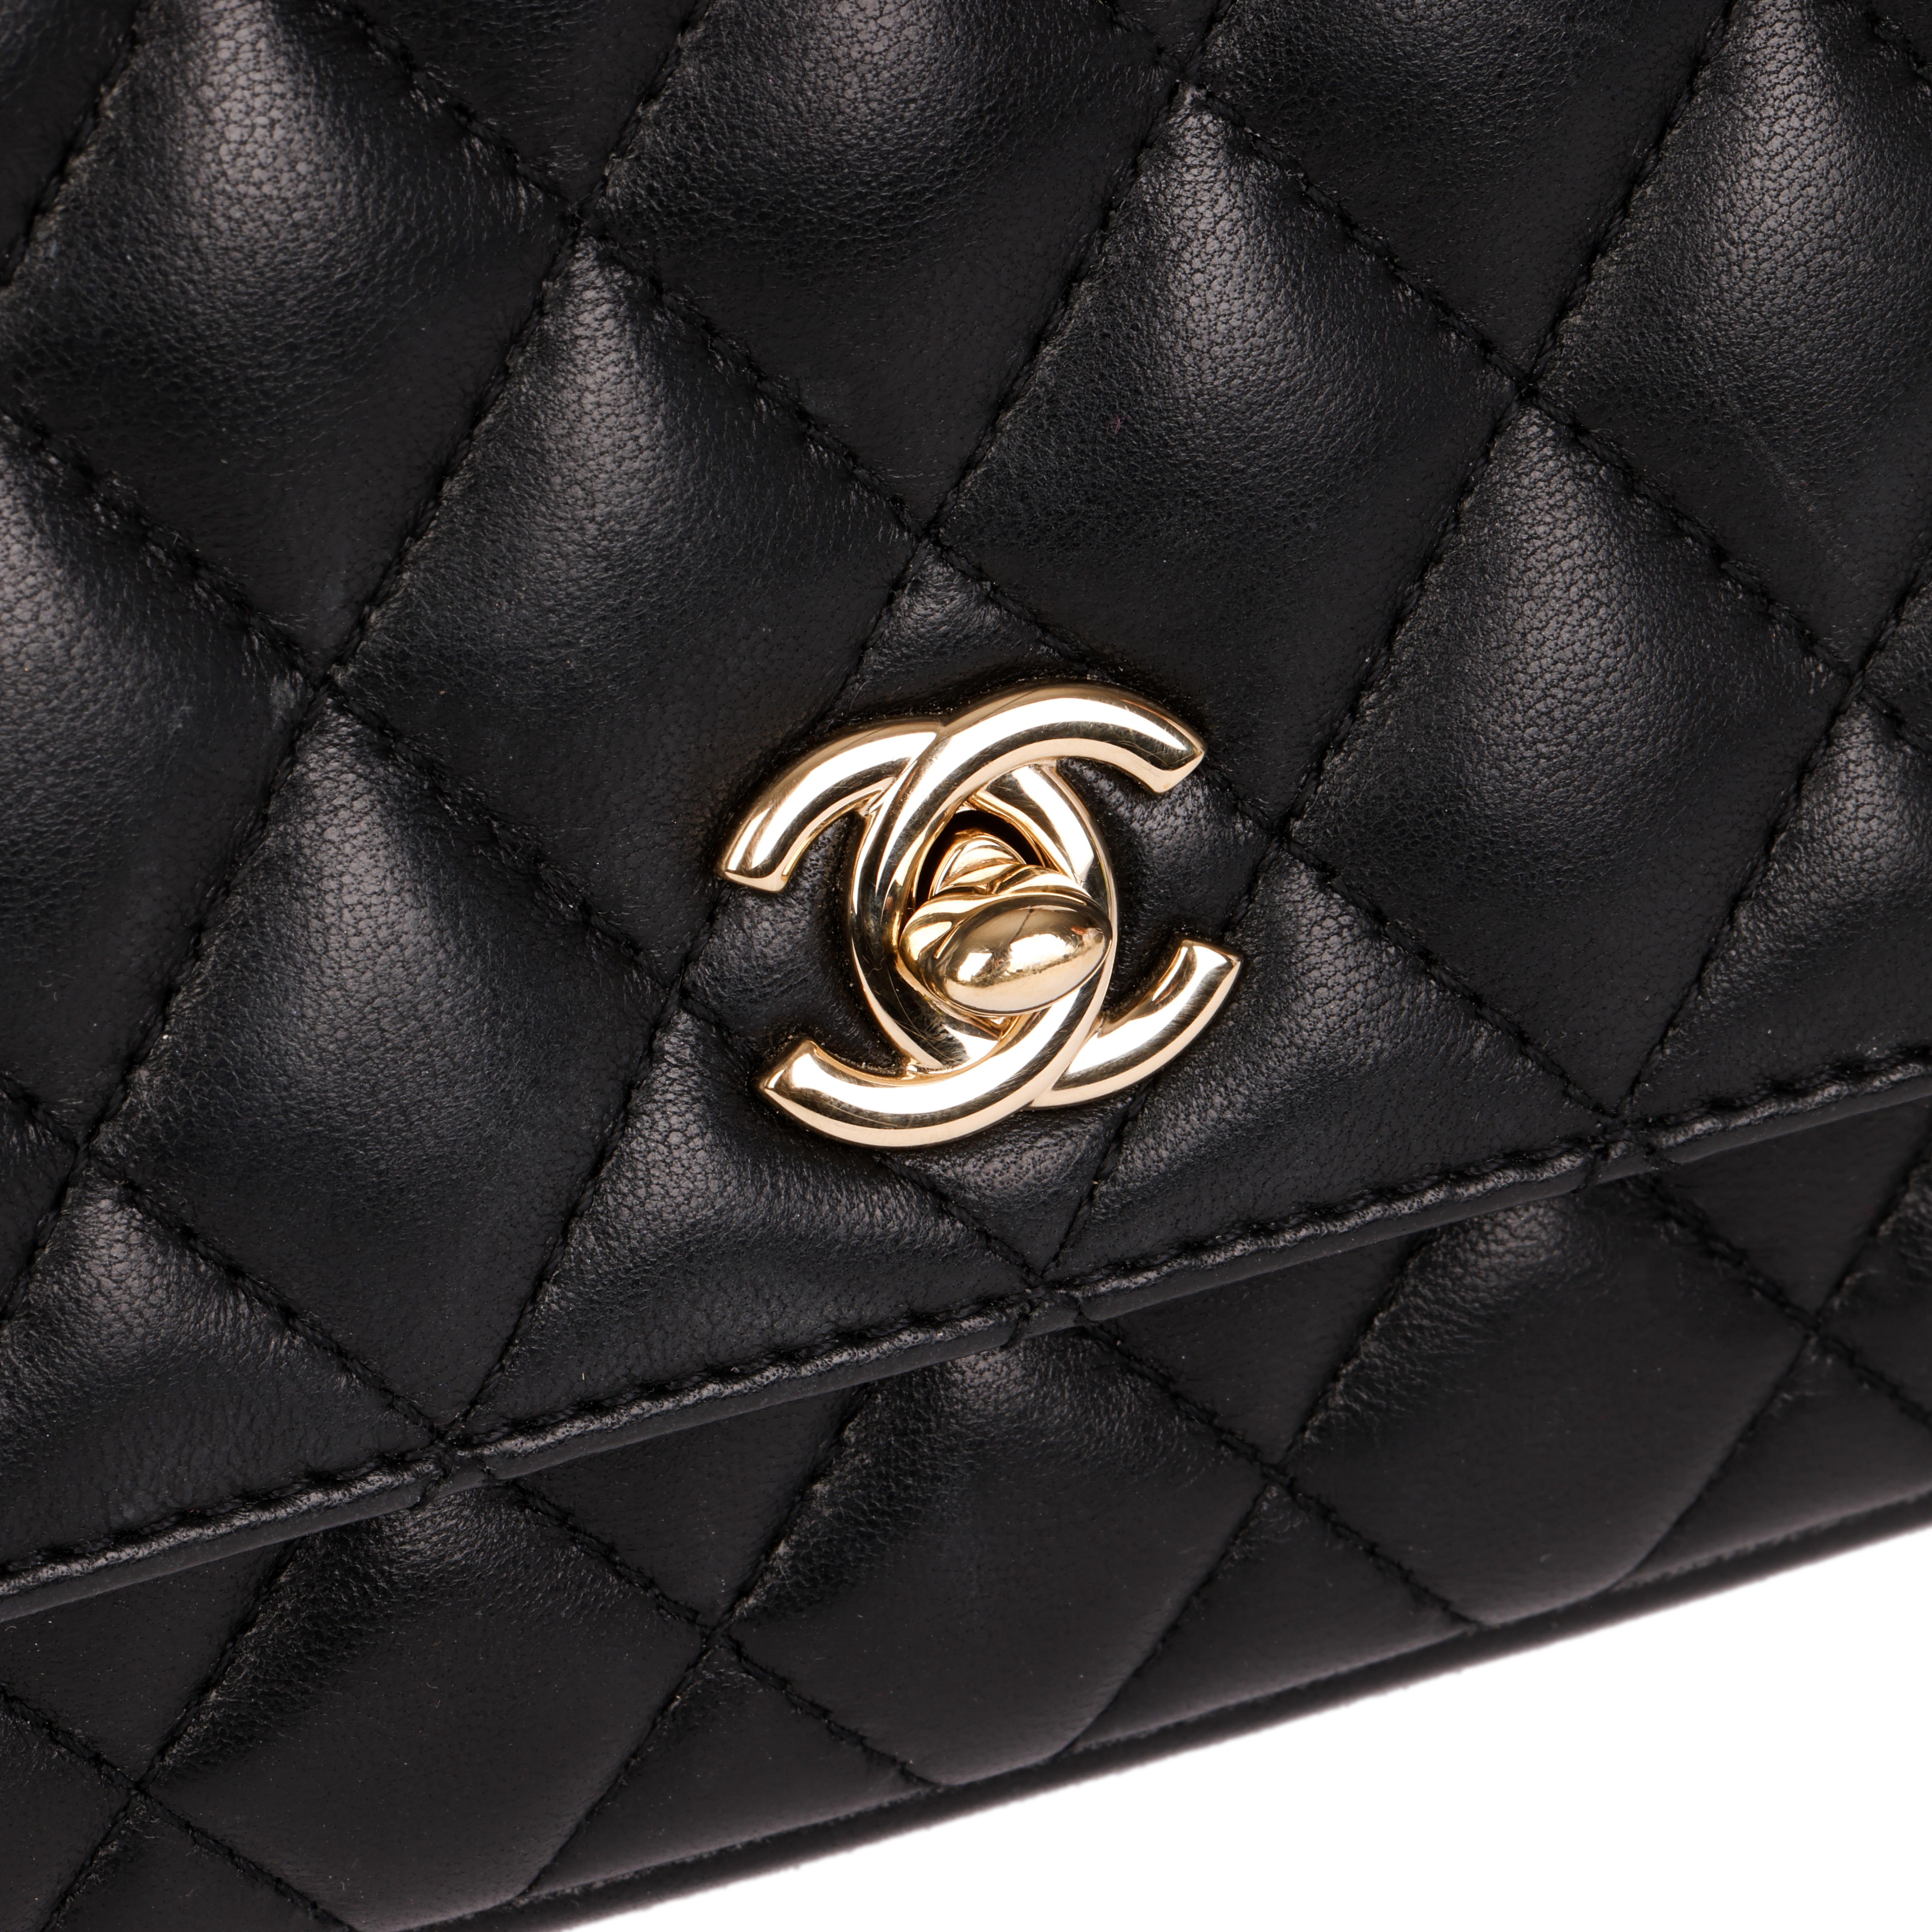 CHANEL
Black Quilted Lambskin Classic Twin Flap Bag Side Pack

Xupes Reference: HB4012
Serial Number: 27507521
Age (Circa): 2019
Accompanied By: Chanel Dust Bag, Authenticity Card
Authenticity Details: Authenticity Card, Serial Sticker (Made in